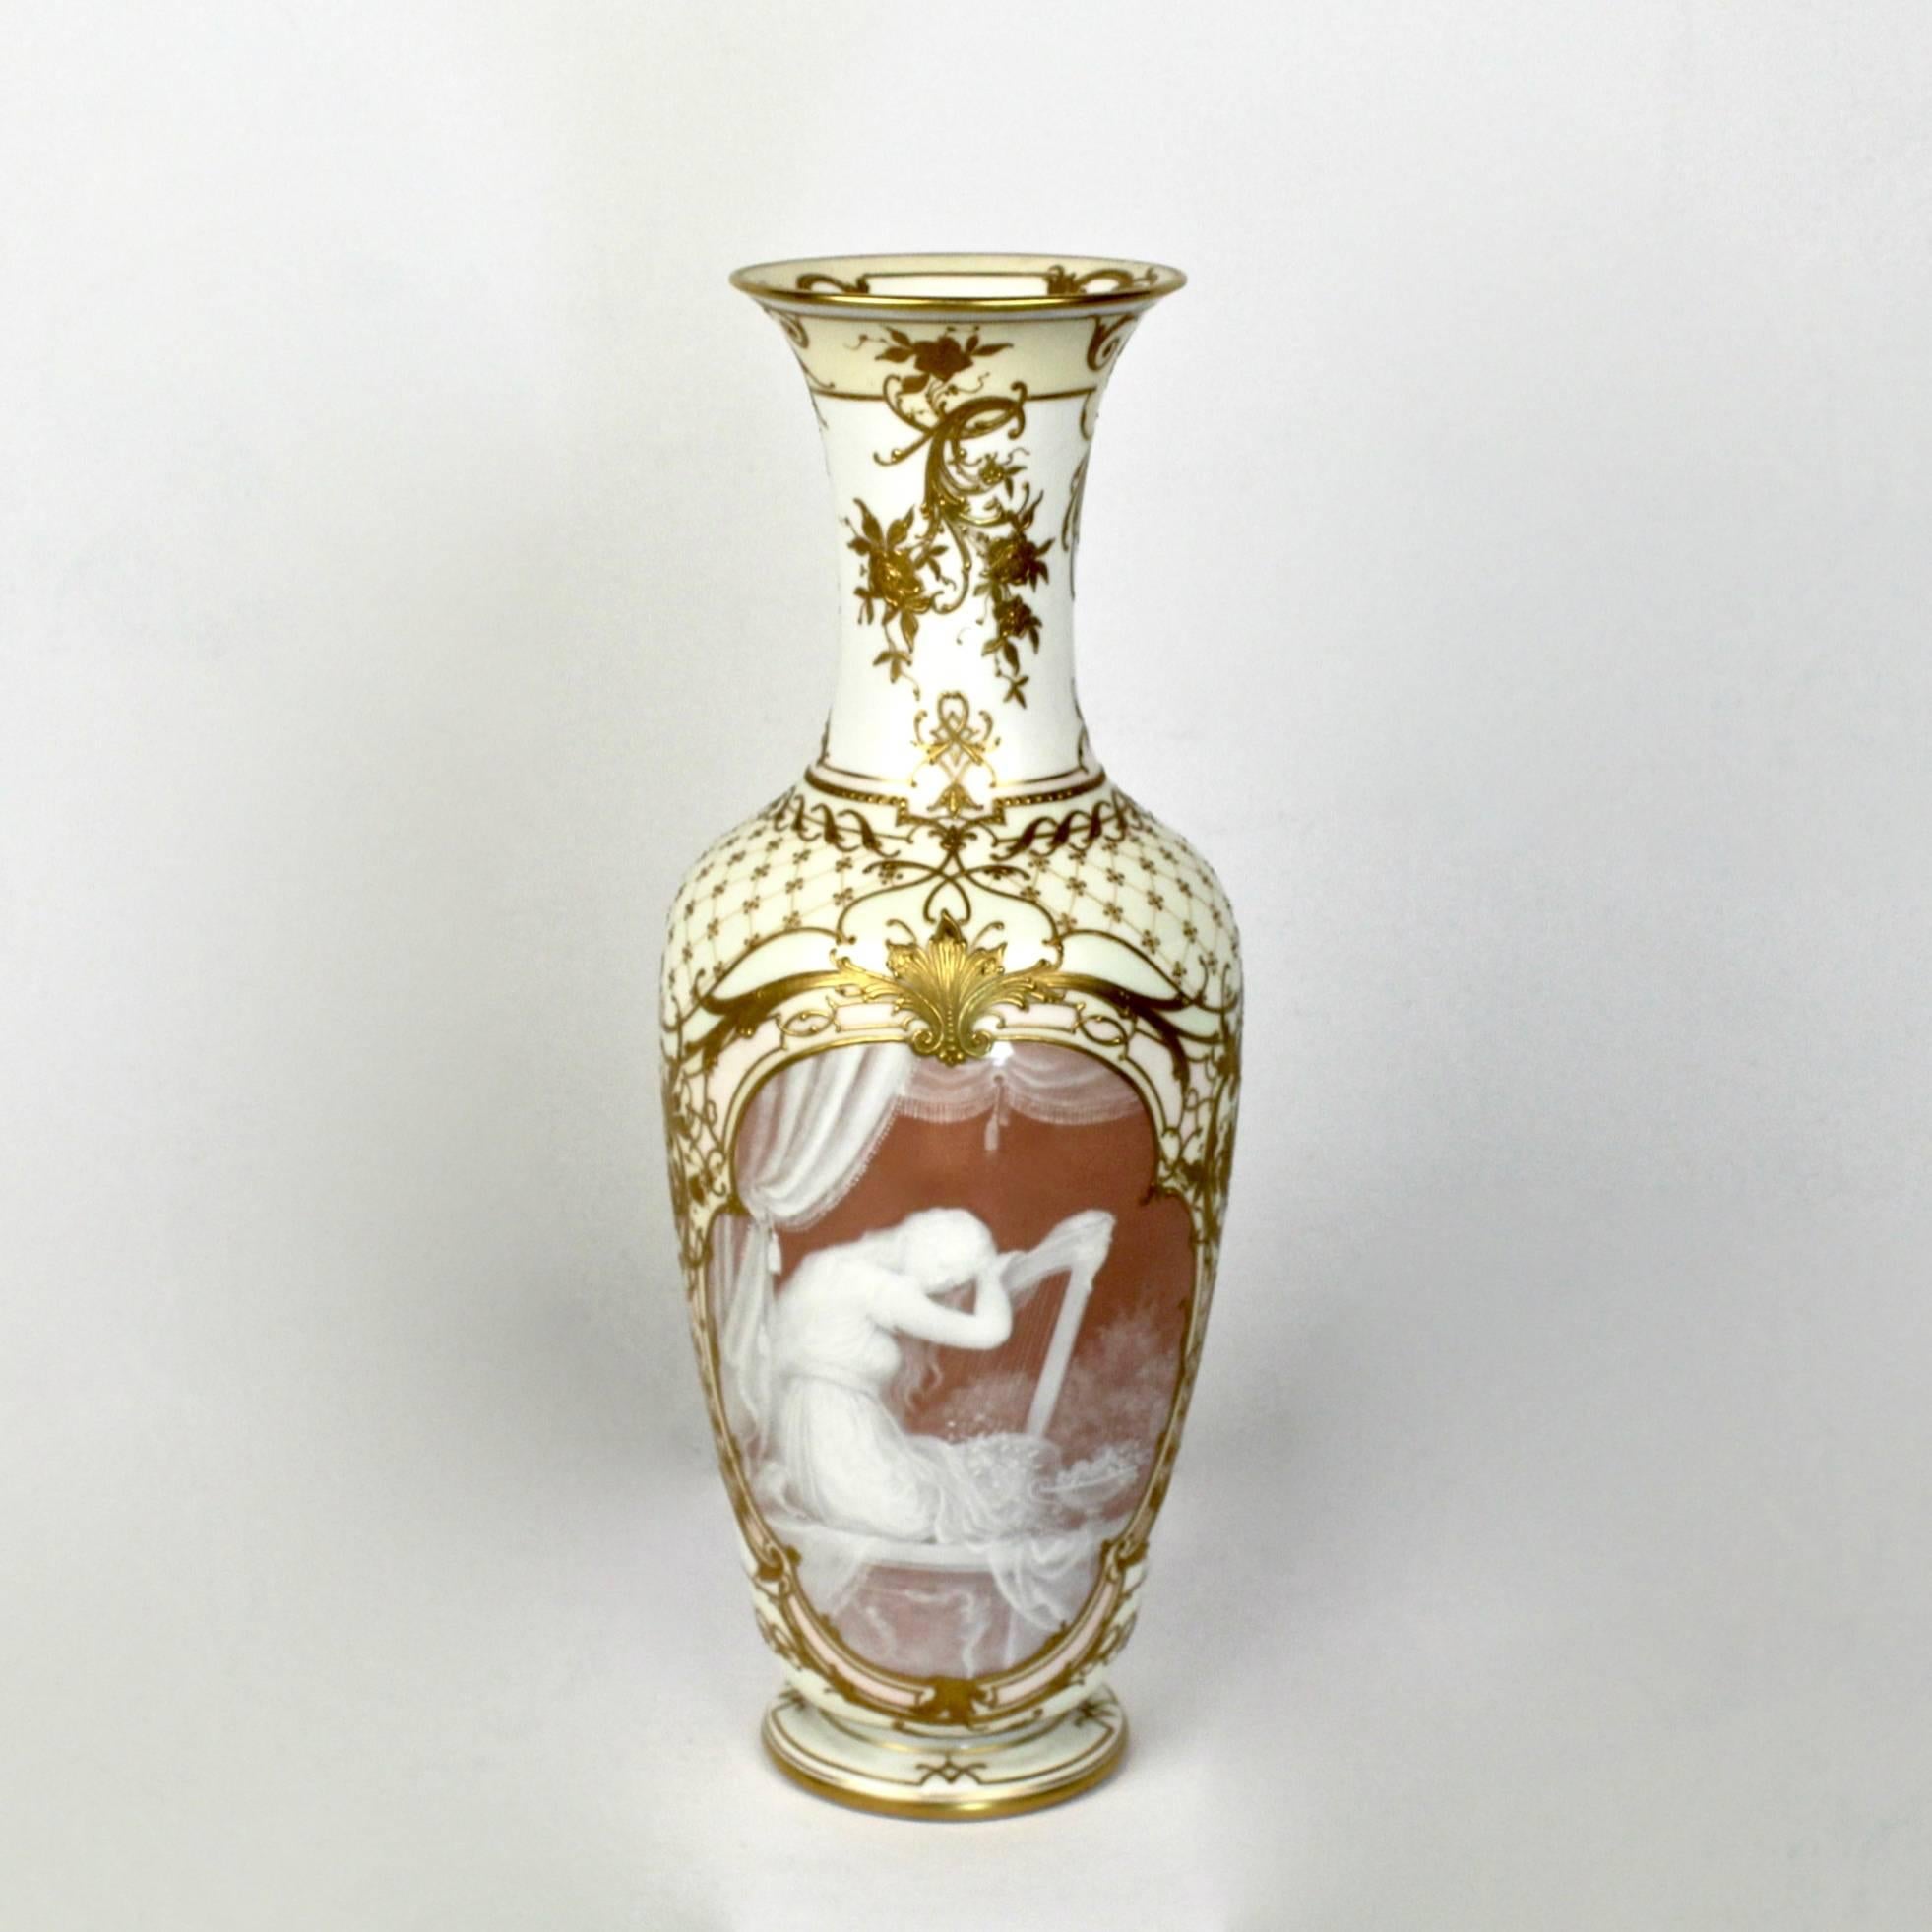 A Köngliche Porzellan Manufaktur (K.P.M.) pâte-sur-pâte porcelain vase of the finest quality. 

The front depicts a young beauty seated at a harp in a large cartouche. The reverse has hand painted flowers. The vase has raised gold decoration